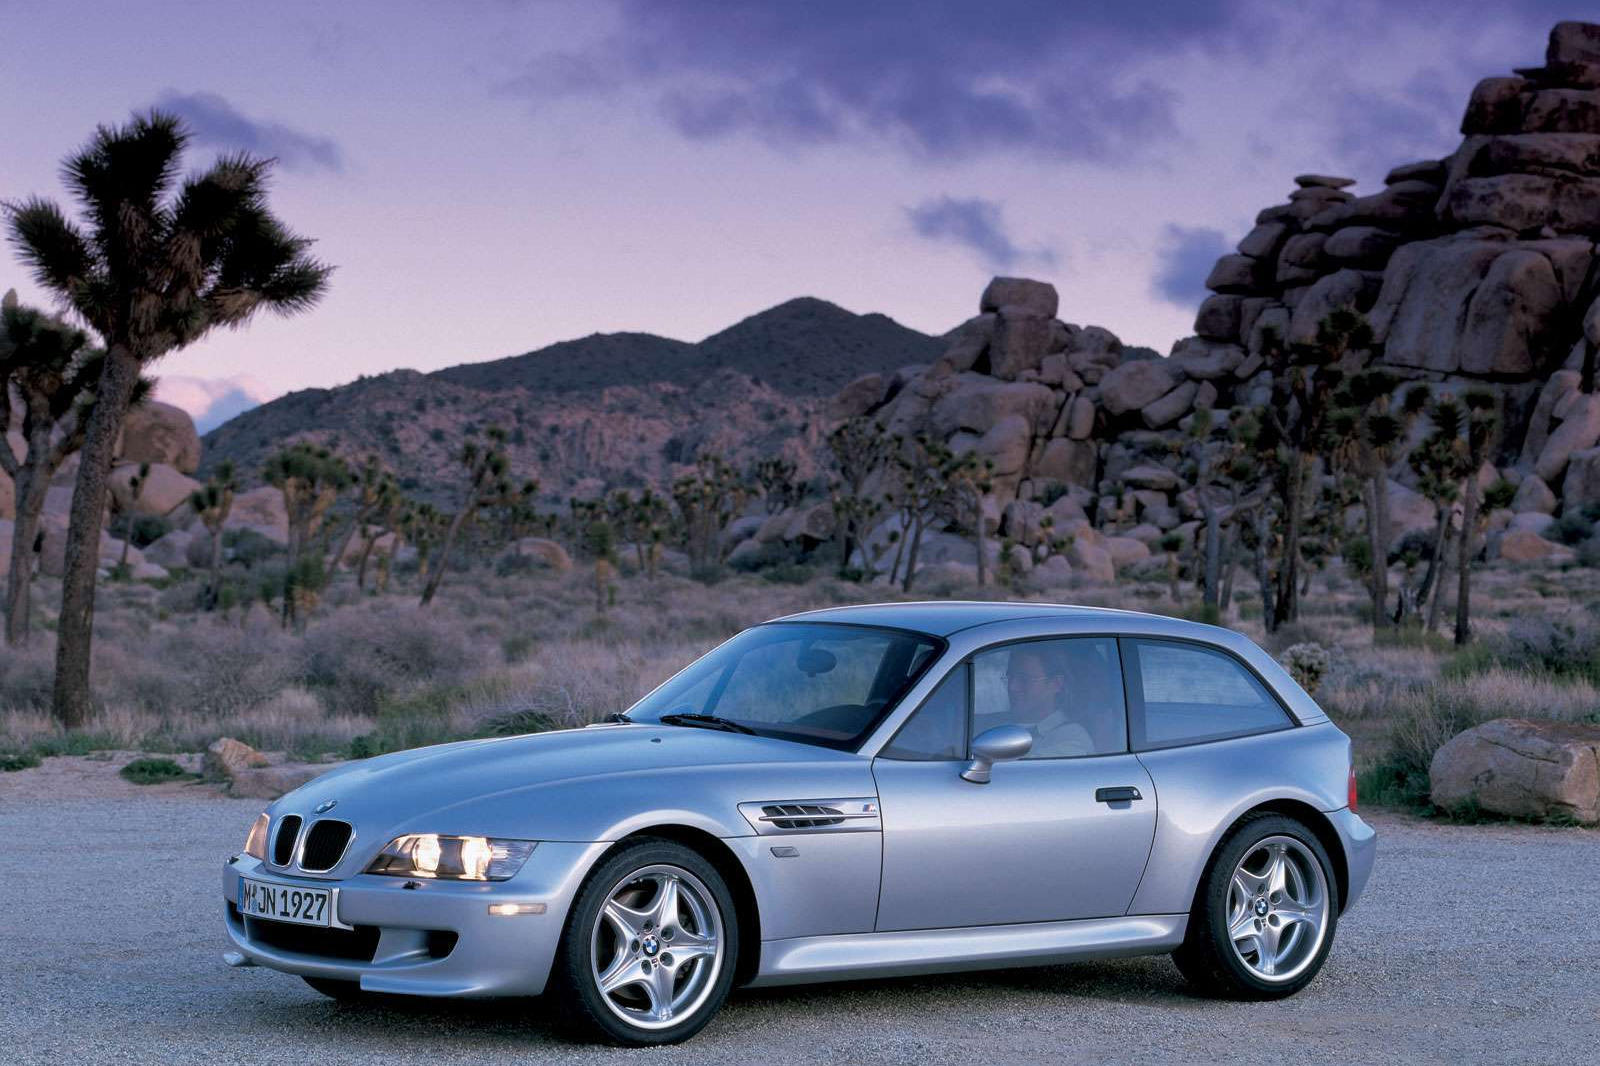 Used BMW Z3 M Coupe | Check Z3 M Coupe for sale in USA: prices of every